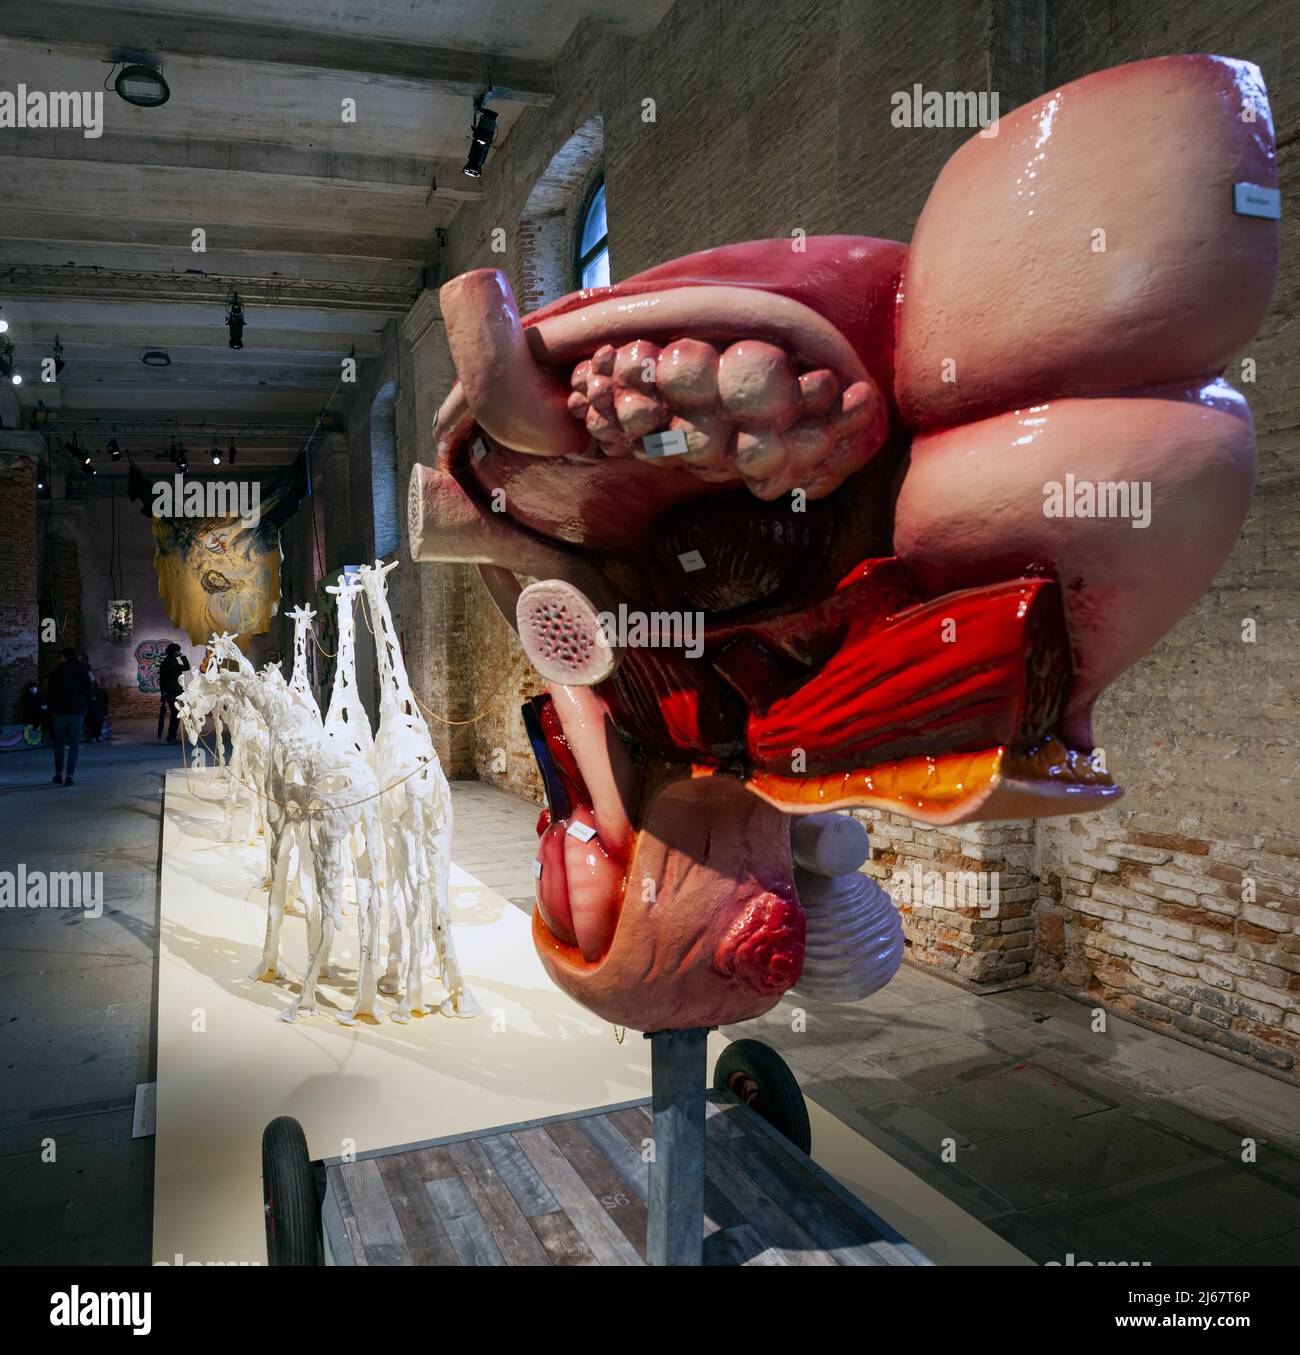 Venice, Italy - April 20: Installation titled Ability and Necessity by Raphaela Vogel at the 59th International Art exhibition of Venice biennale on A Stock Photo